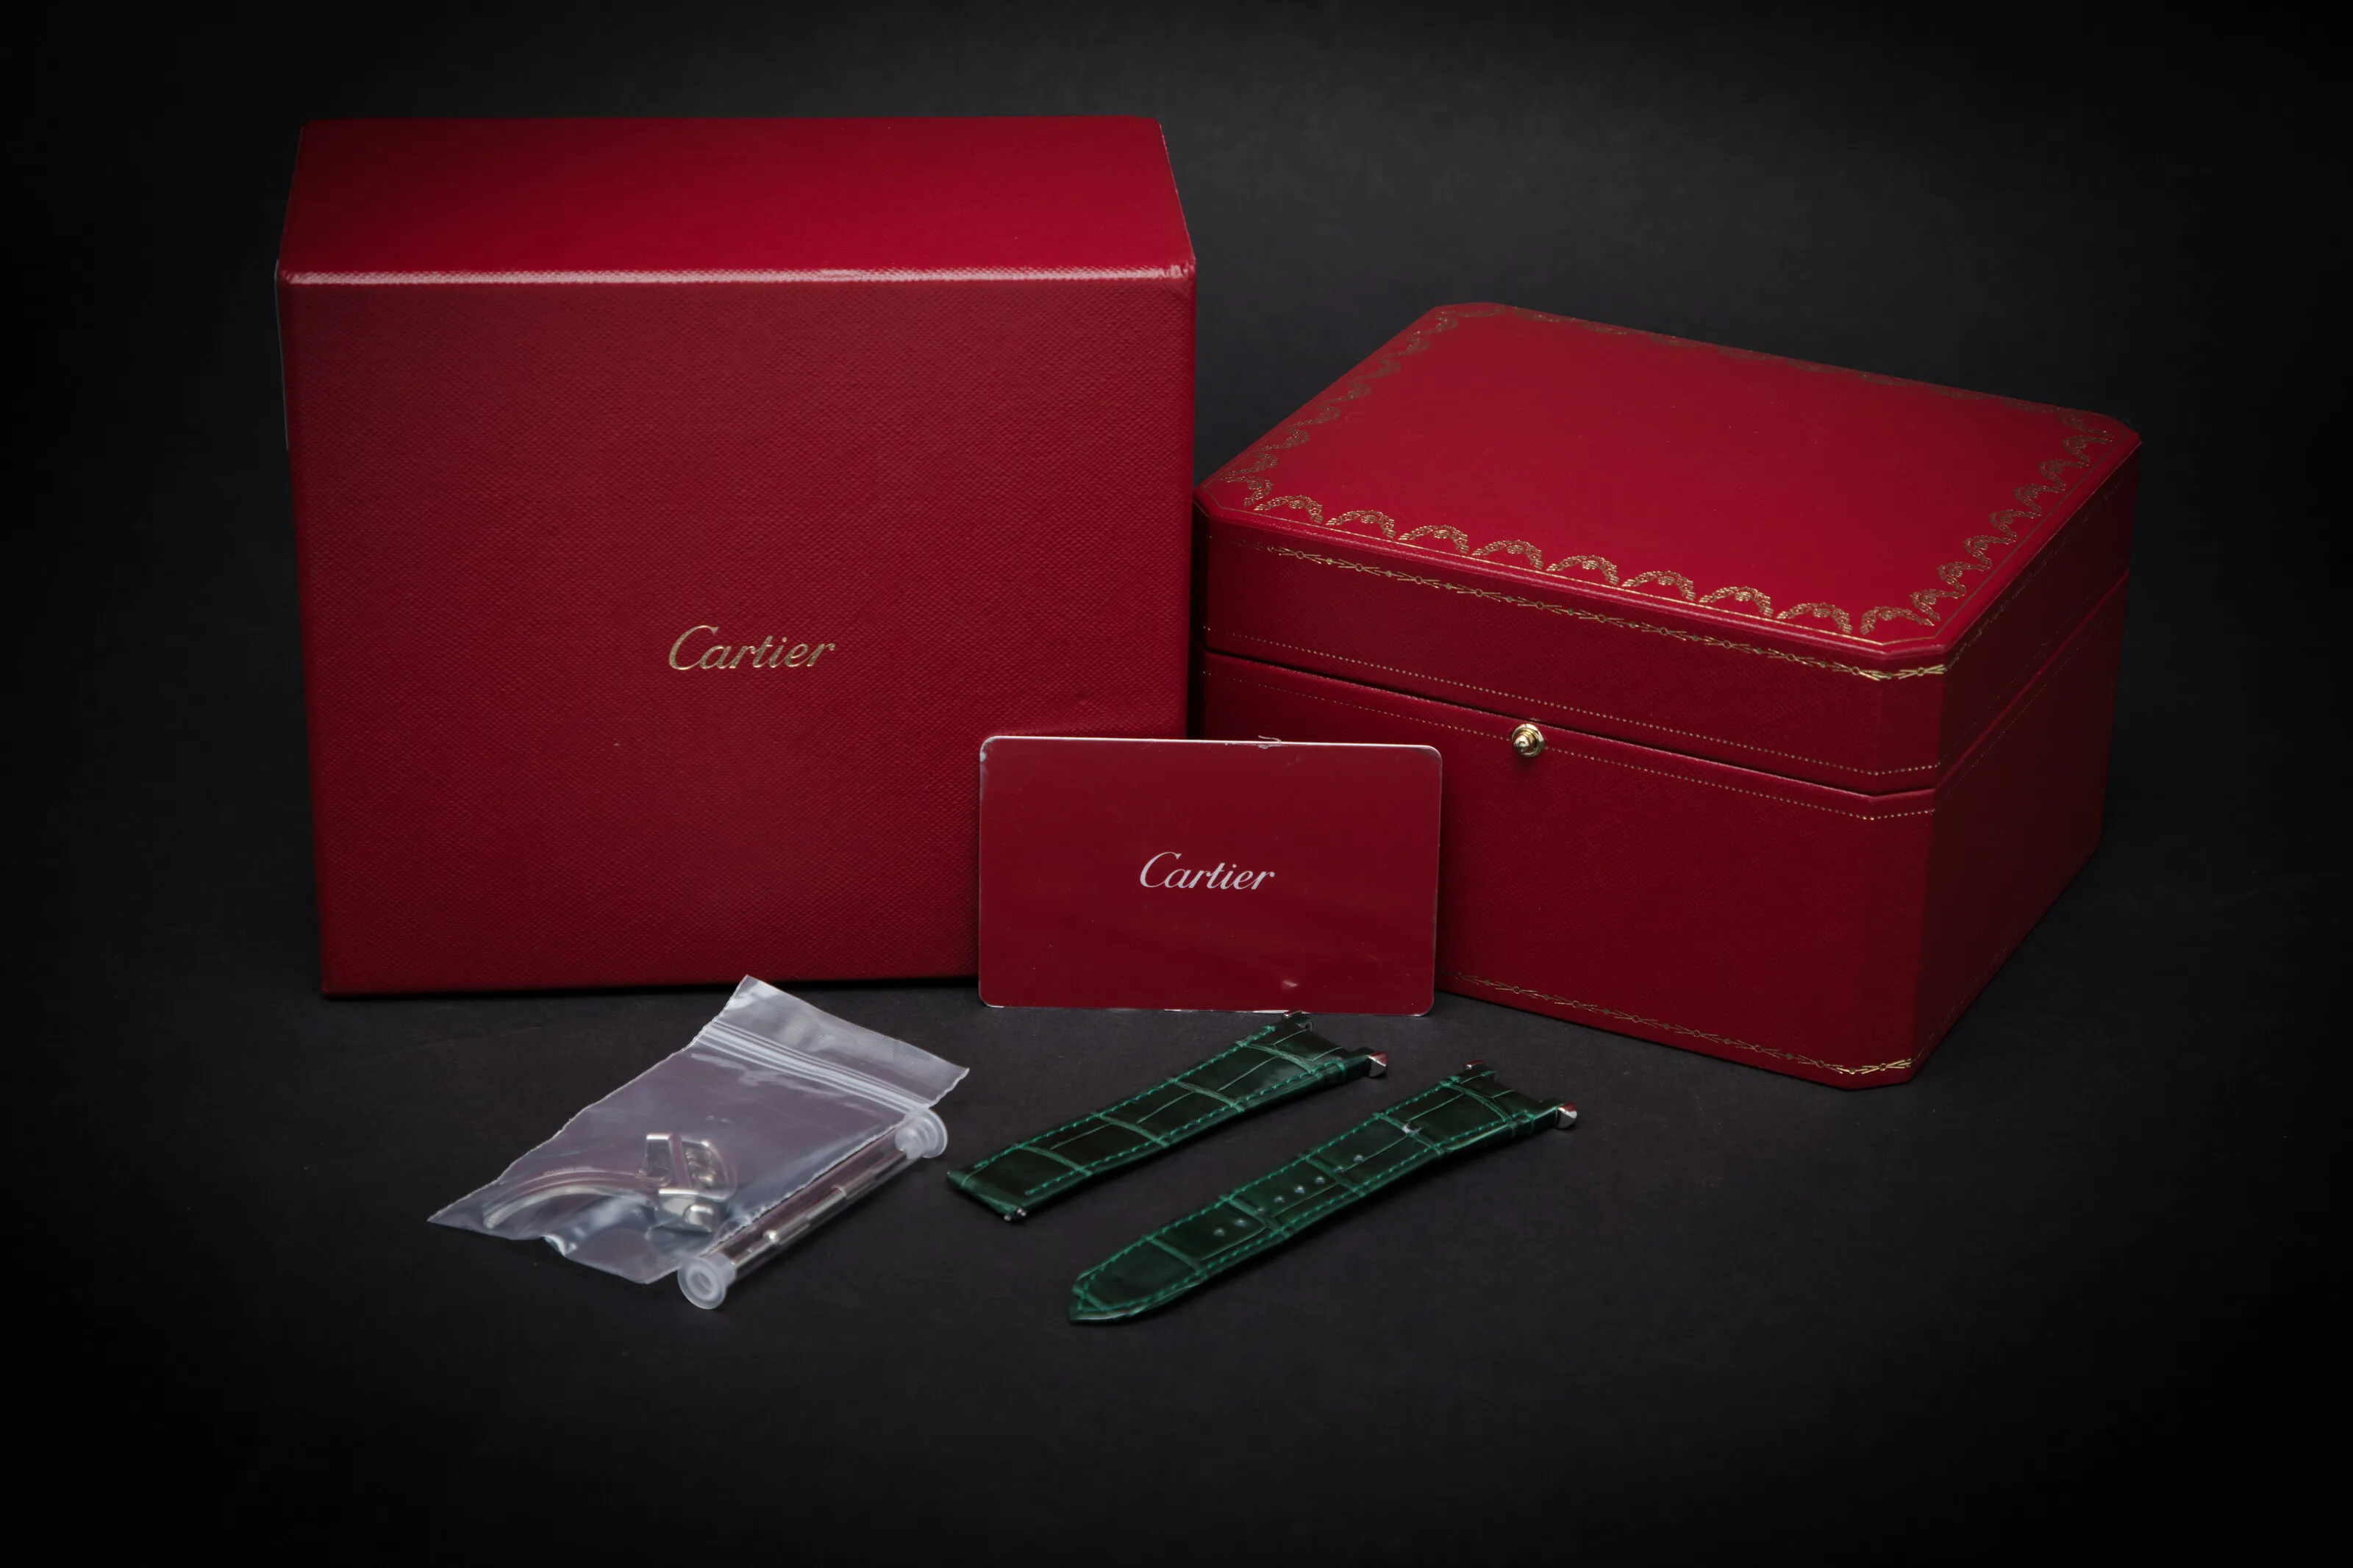 Cartier Pasha WSPA0022 41mm Stainless steel Green 2